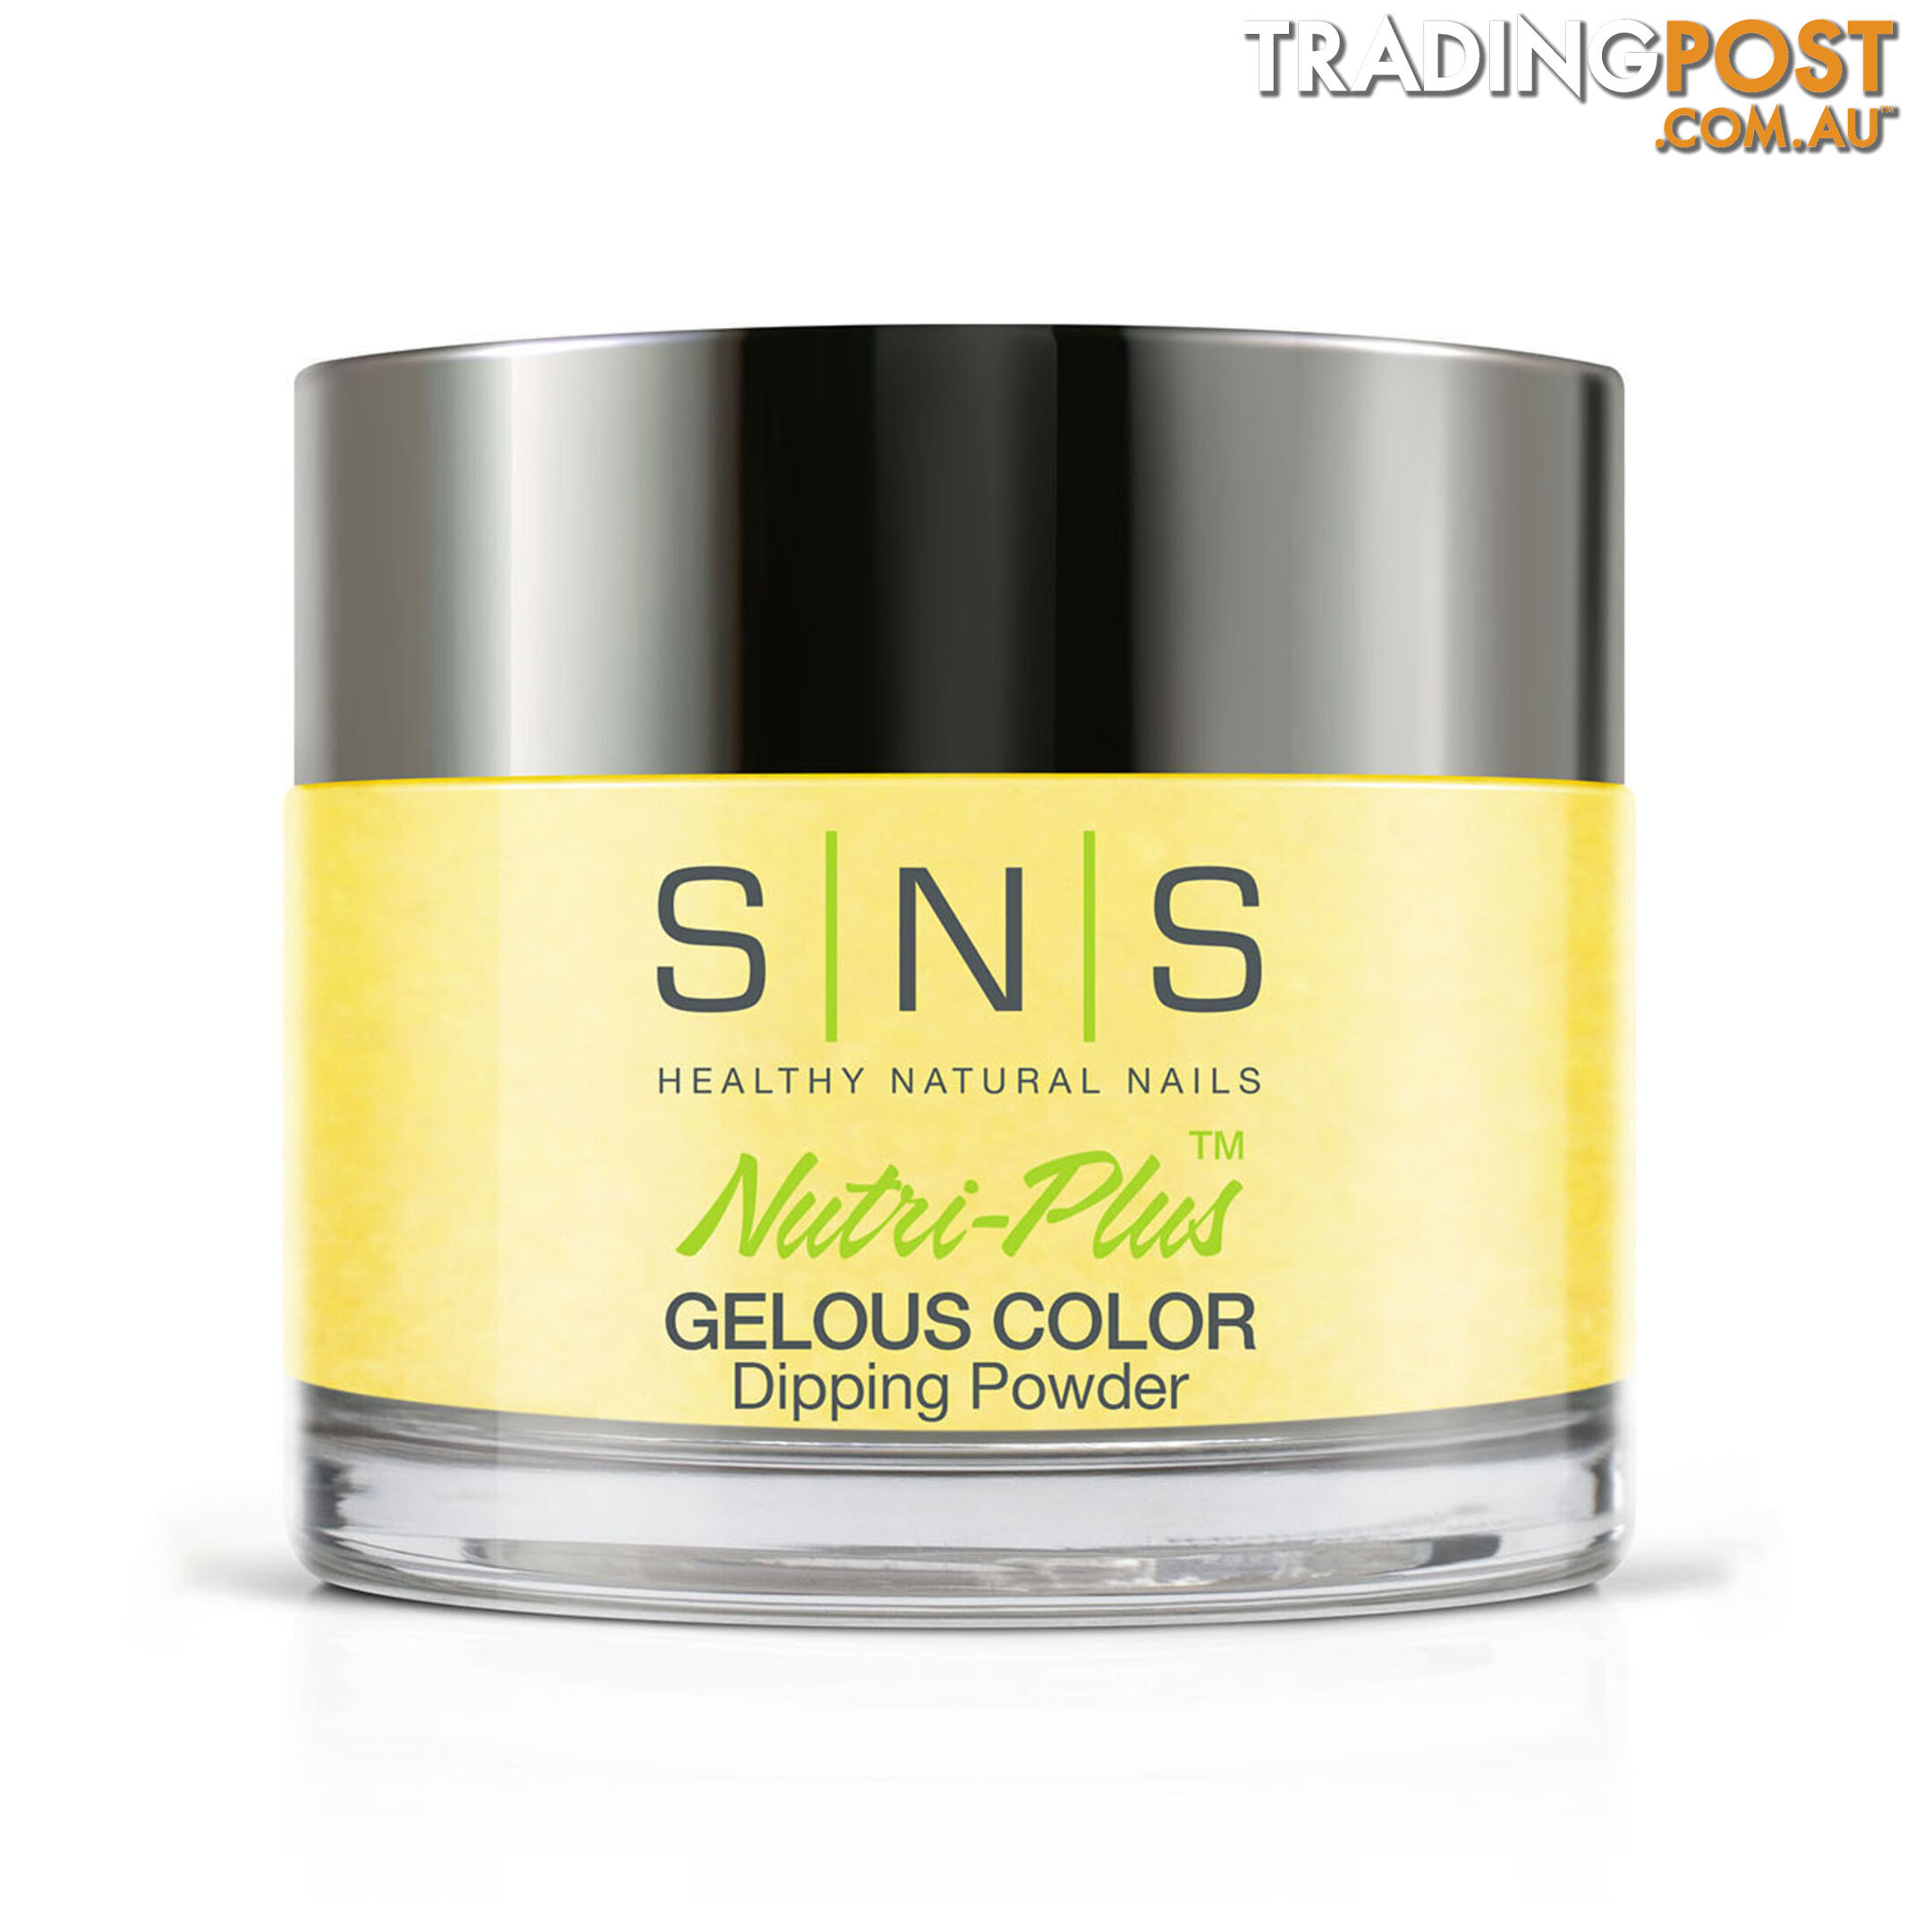 SNS #389 Gelous Dipping Powder 28g (1oz) Chyellow Lessons - 635635737641